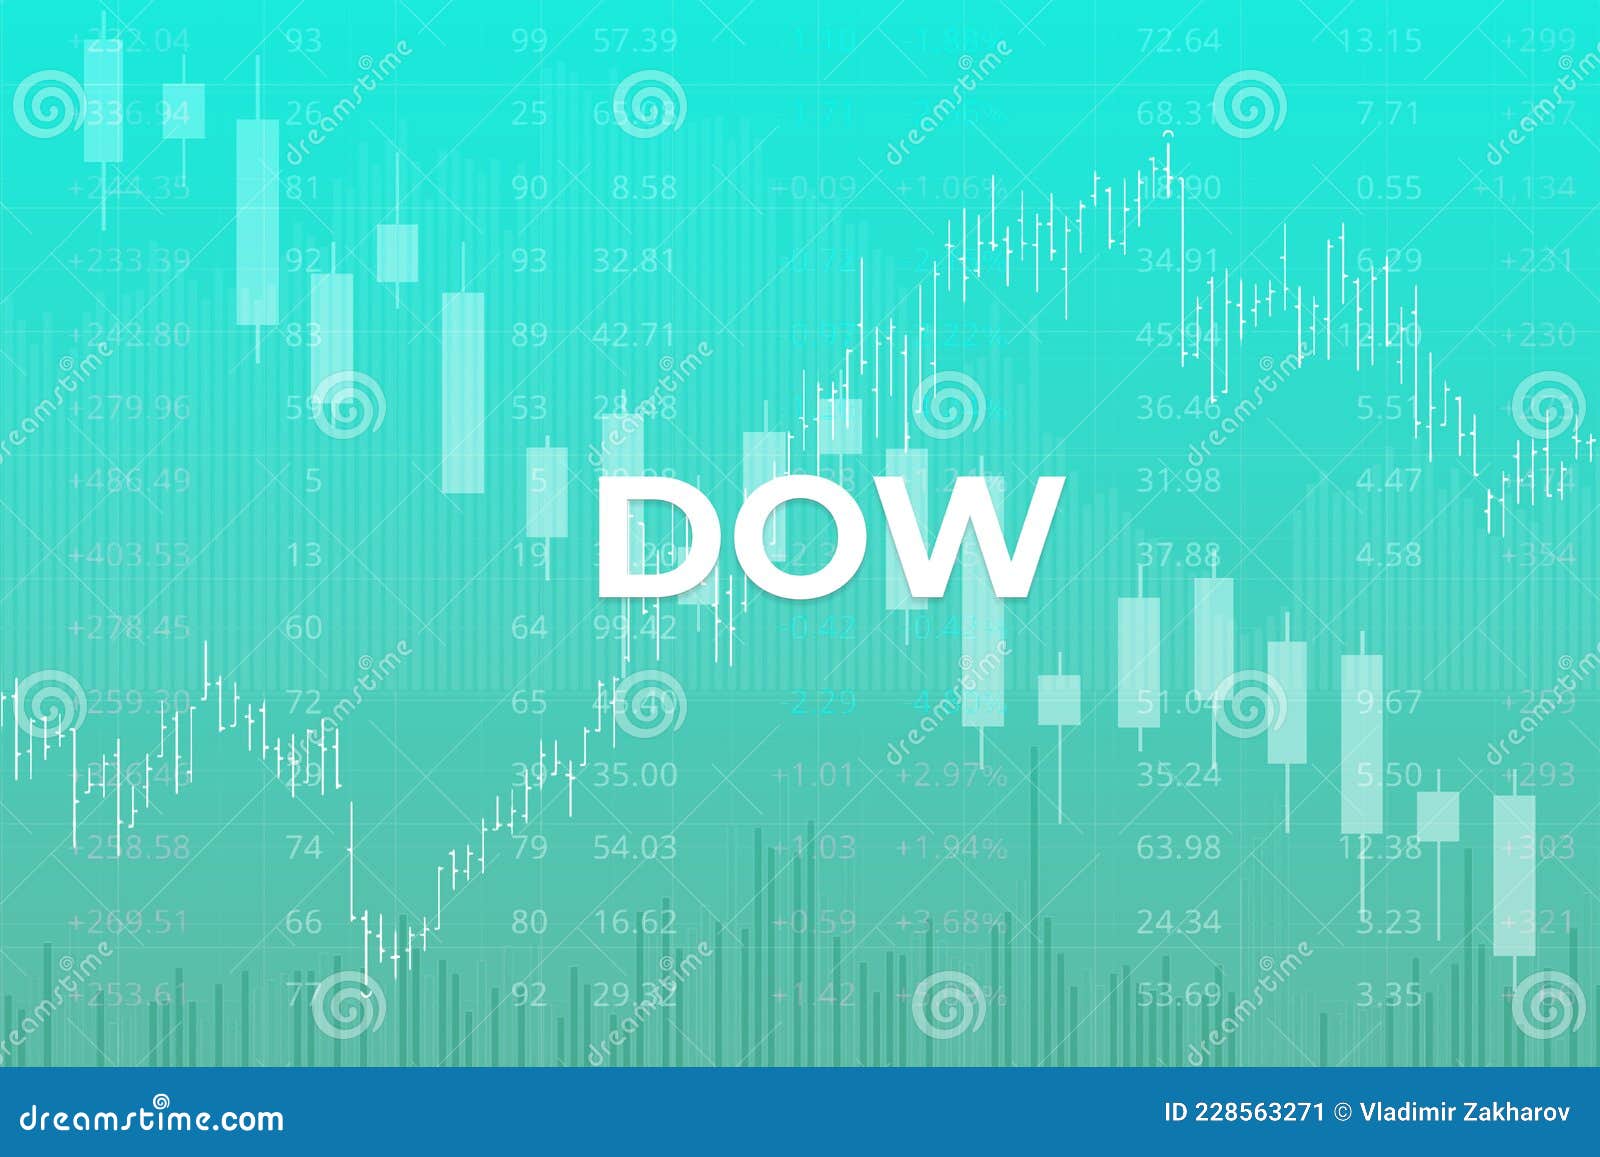 American Financial Index Dow Jones Ticker DOW on Blue Finance Background from Numbers, Graphs, Pillars, Candles, Bars. Stock Illustration Illustration of invest, 228563271